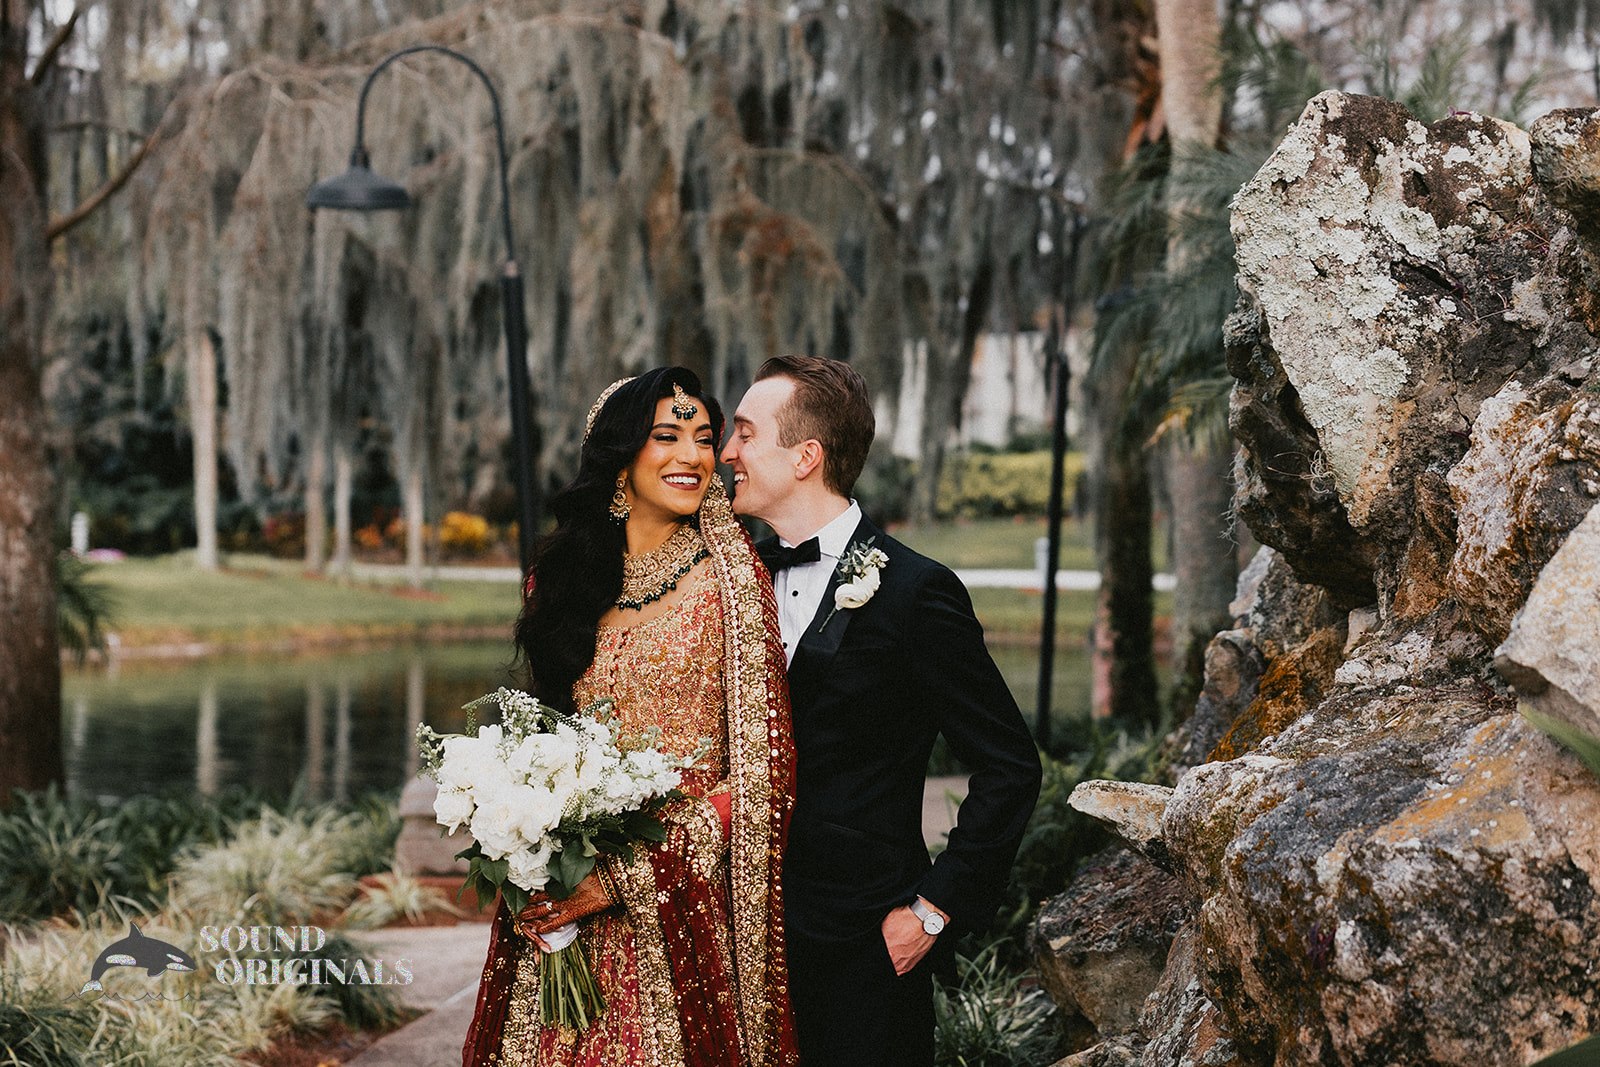 couple posing for photo in lush, natural environment. moss hangs from the trees and a rock formation sits behind them. the couple faces each other, the bride holding a bouquet of white flowers.